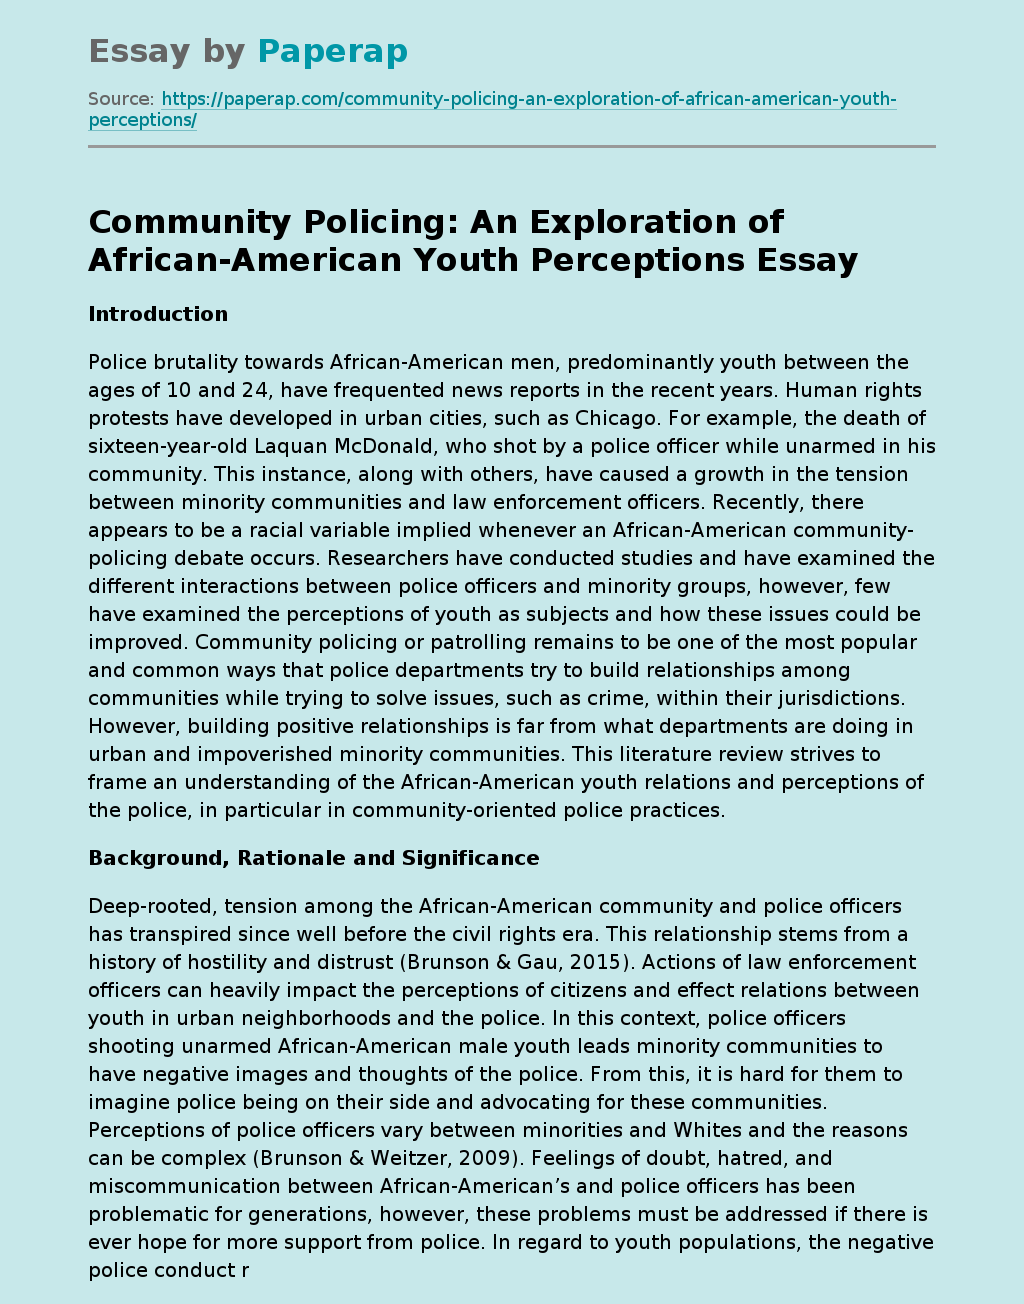 Community Policing: An Exploration of African-American Youth Perceptions